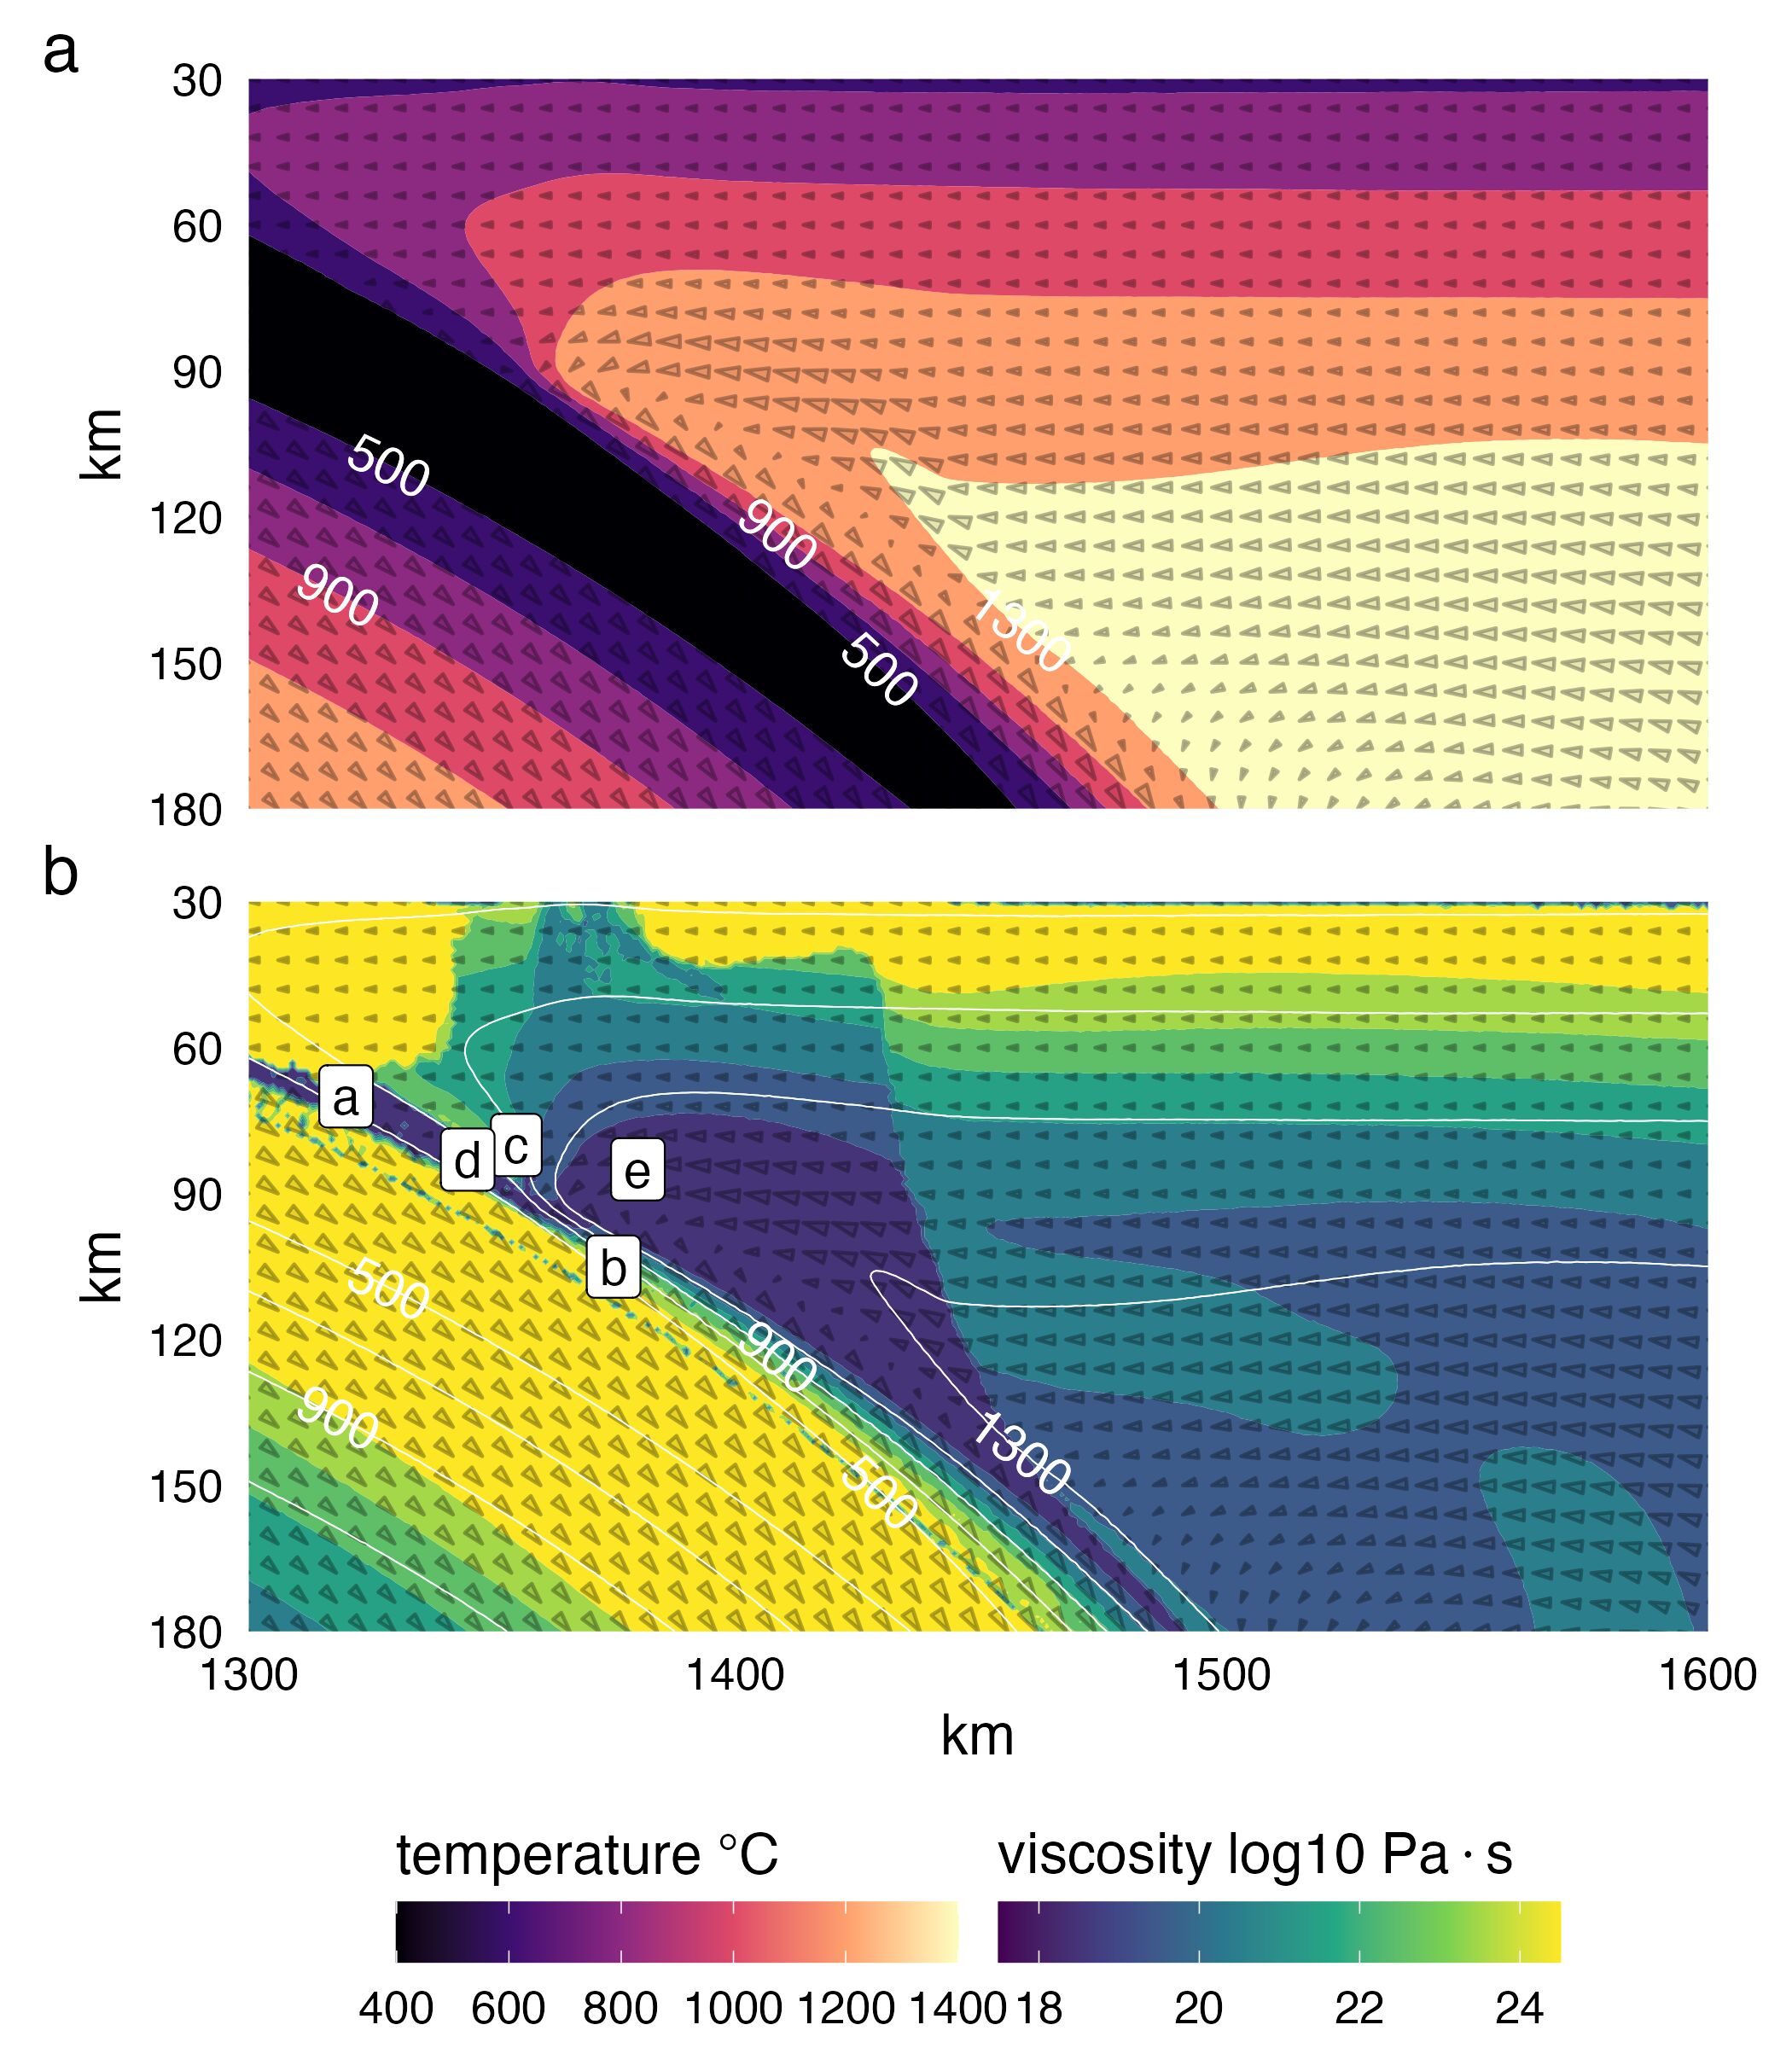 Visualizing viscosity and mantle flow near the coupling region at approximately 10 Ma for model cdf with upper-plate thickness of 78 km. (a) Temperature field. (b) Strong mantle flow beneath the lithospheric base (1100˚C) transfers heat towards the coupling region. Viscosity indicates coupling at the point where the viscosity contrast between the slab and mantle approaches zero (between points b & d). Reference points a-e are used for discussing coupling dynamics and thermal feedbacks (see Section 2.4.2).